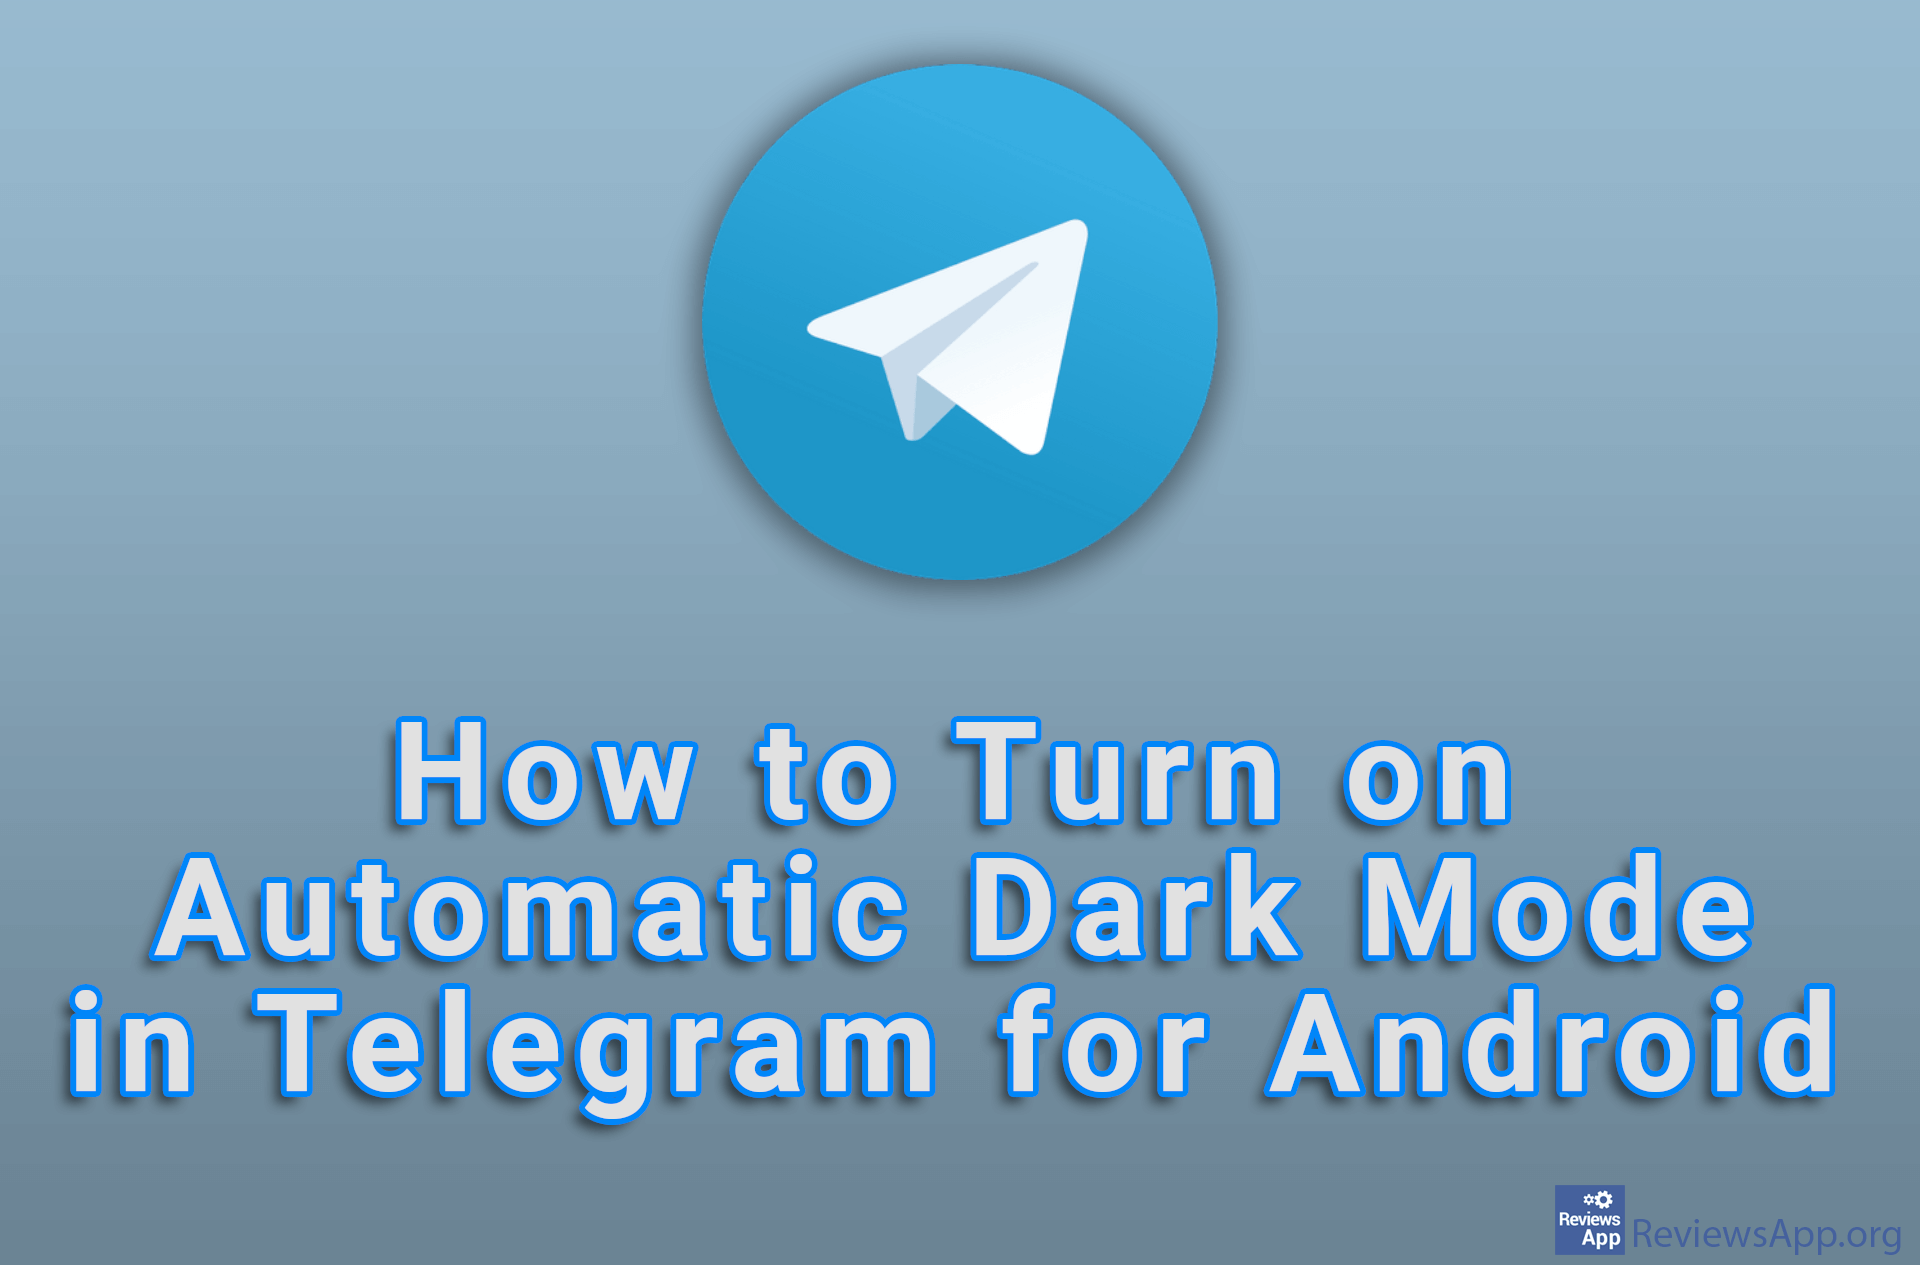 How to Turn on Automatic Dark Mode in Telegram for Android